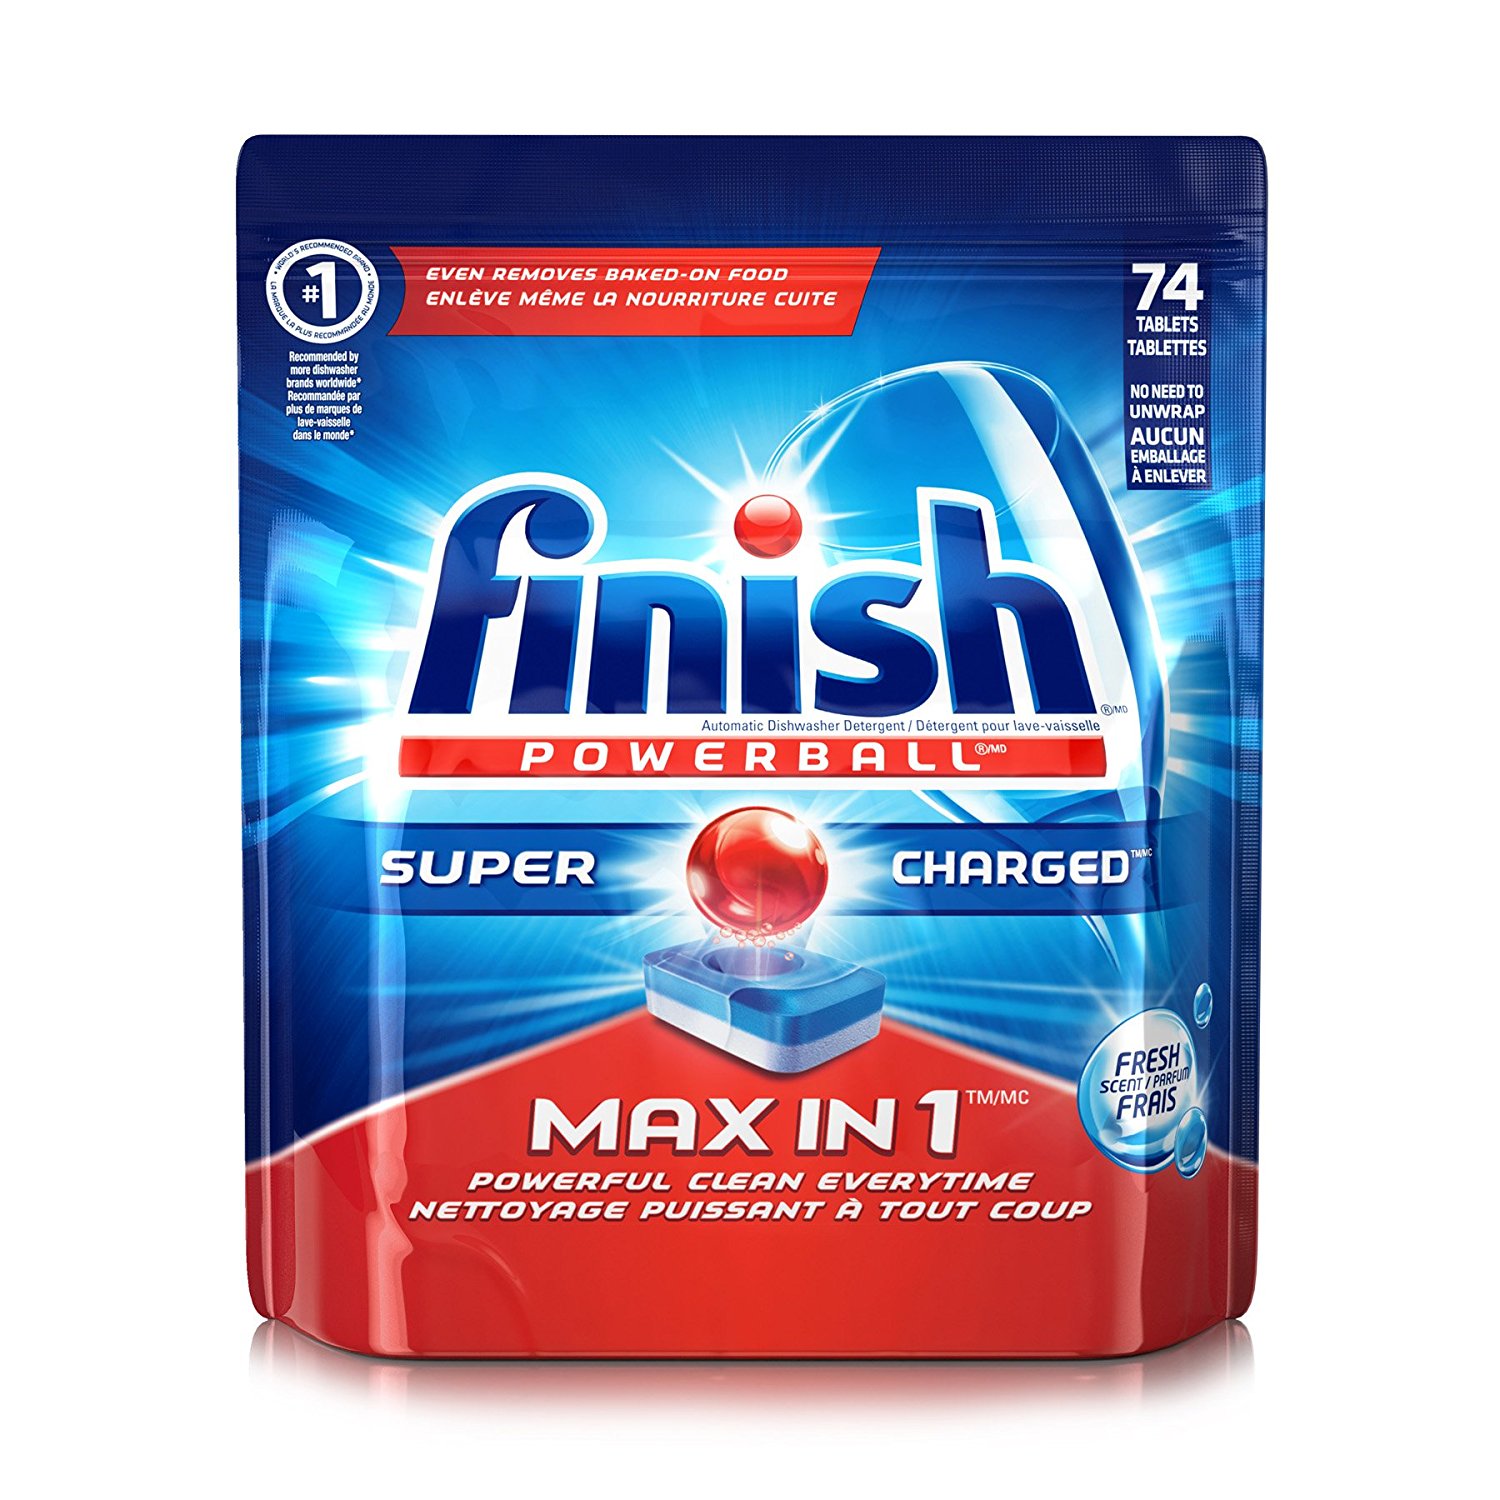 Finish Max in 1 Powerball Automatic Dishwasher Detergent, 74 Tablets – Just $11.07!